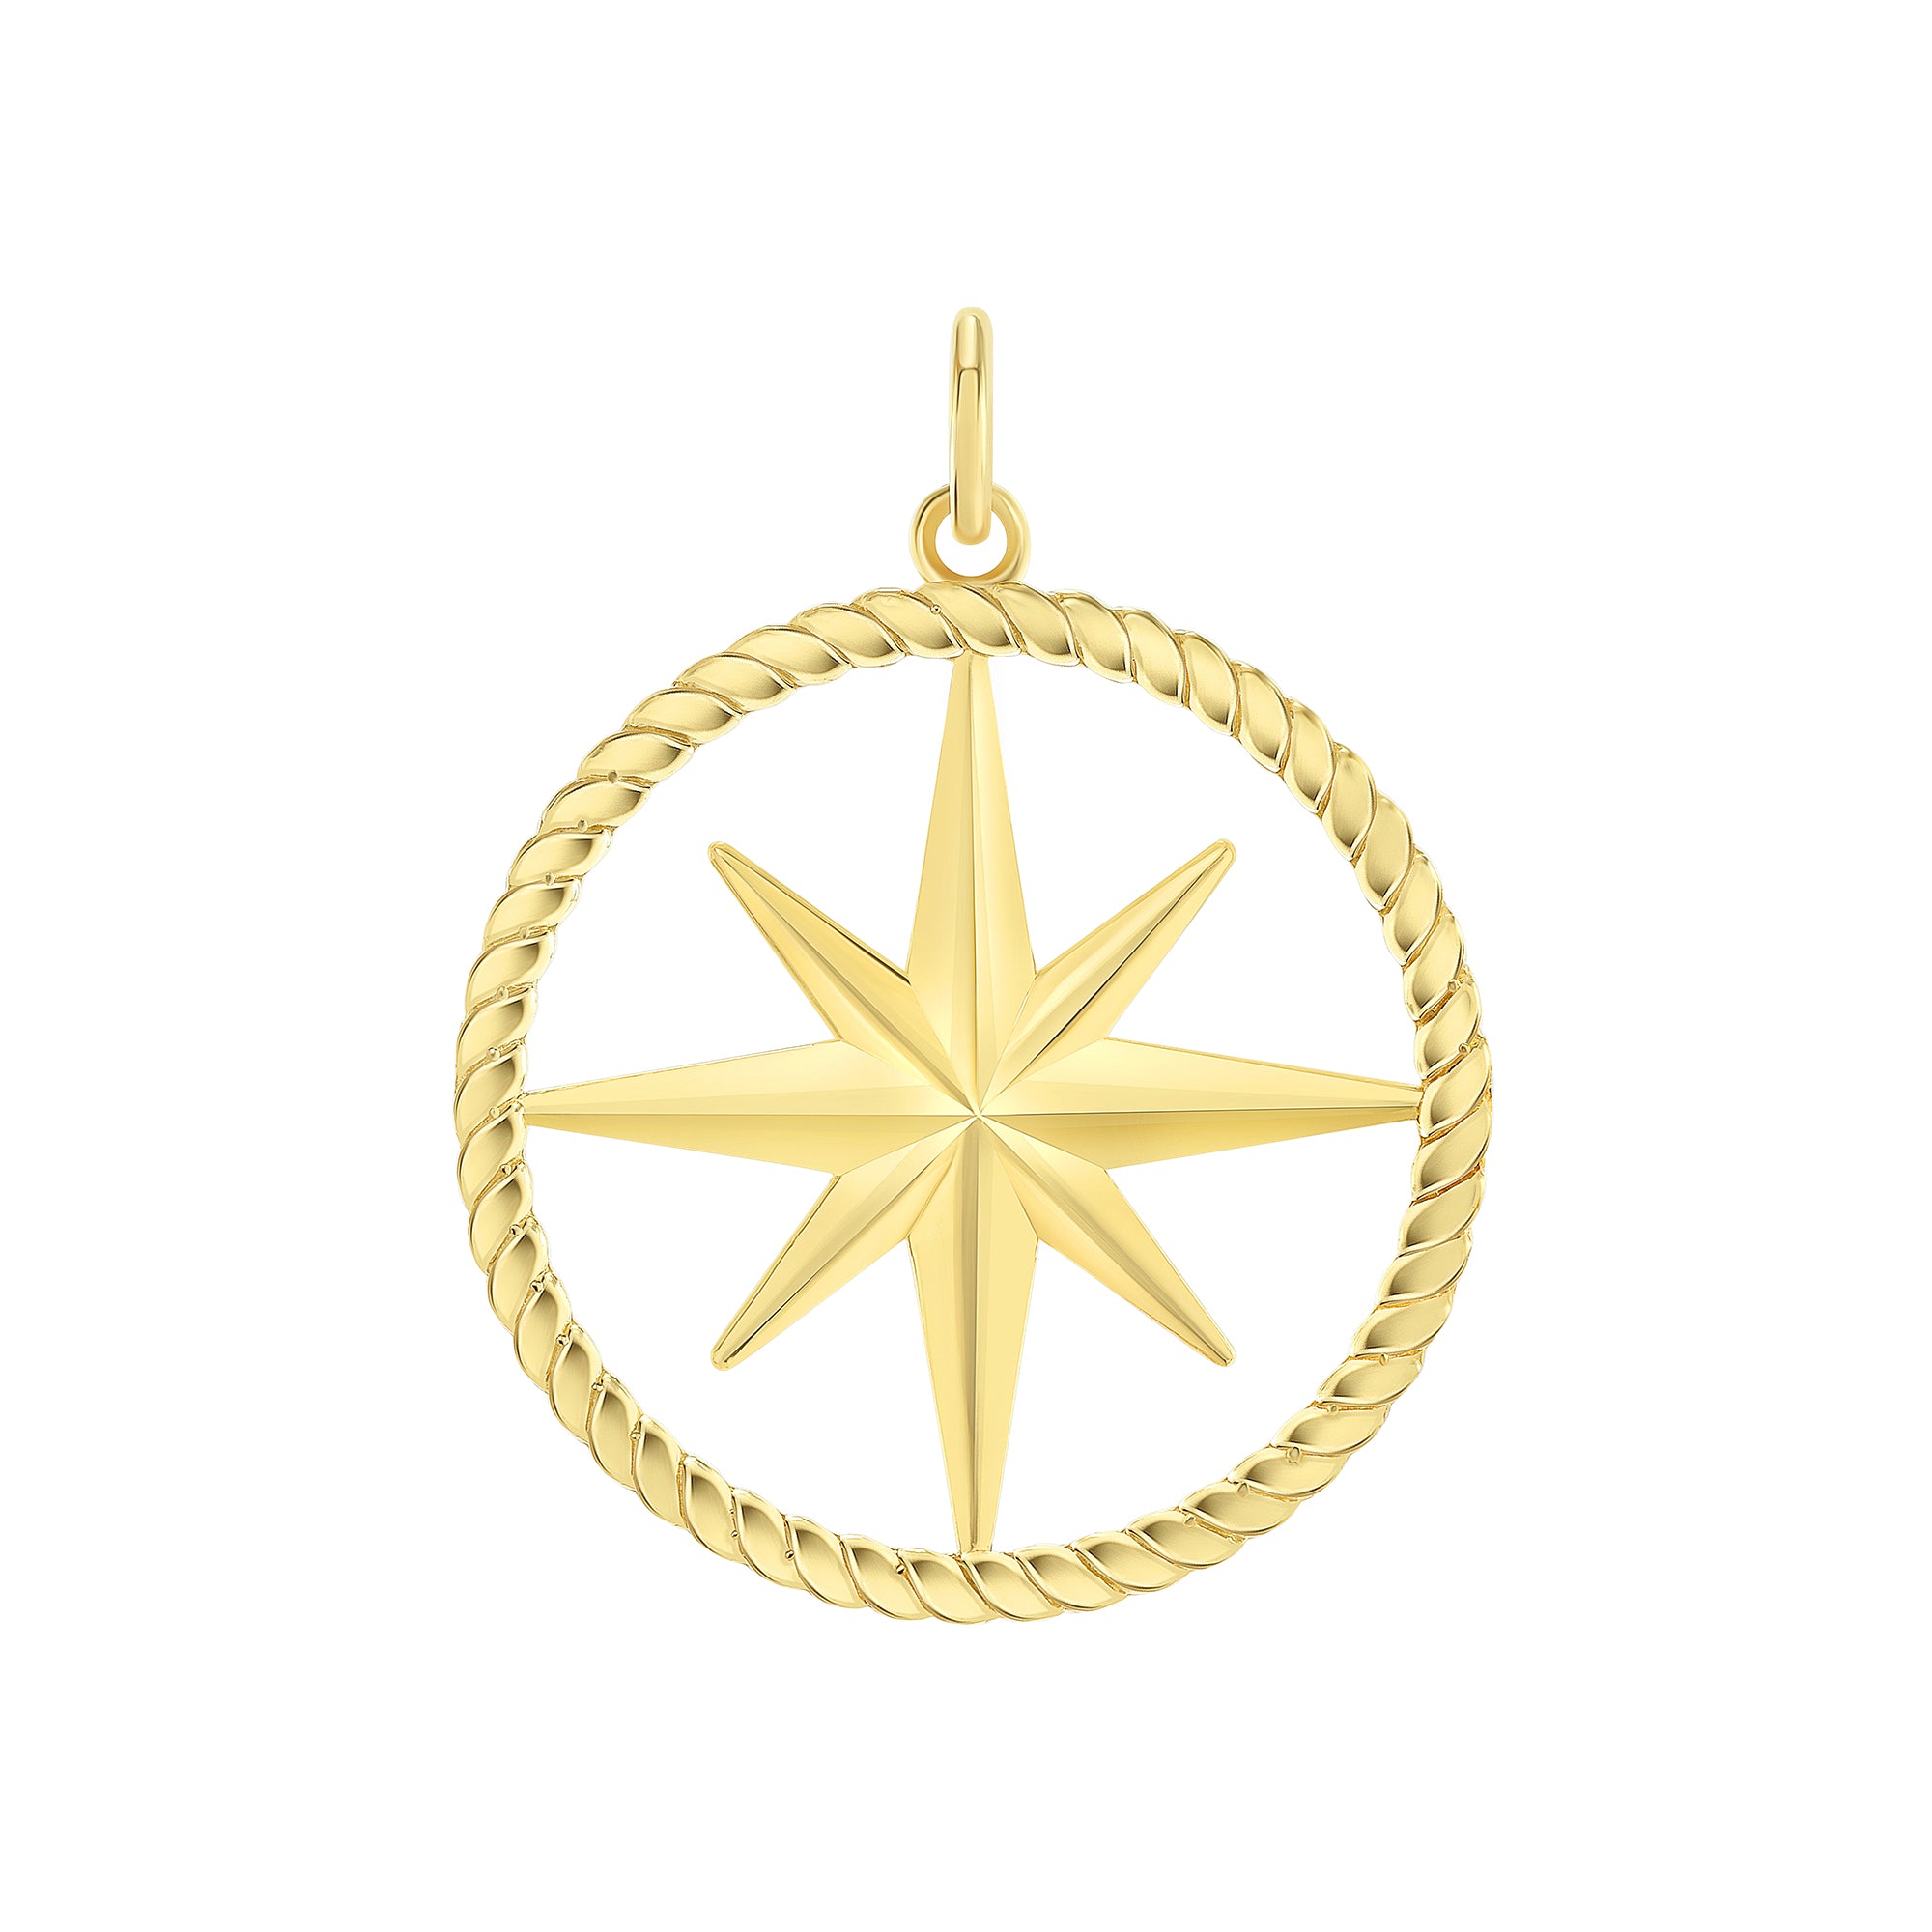 14K Real Solid Gold North Star Necklace for Women